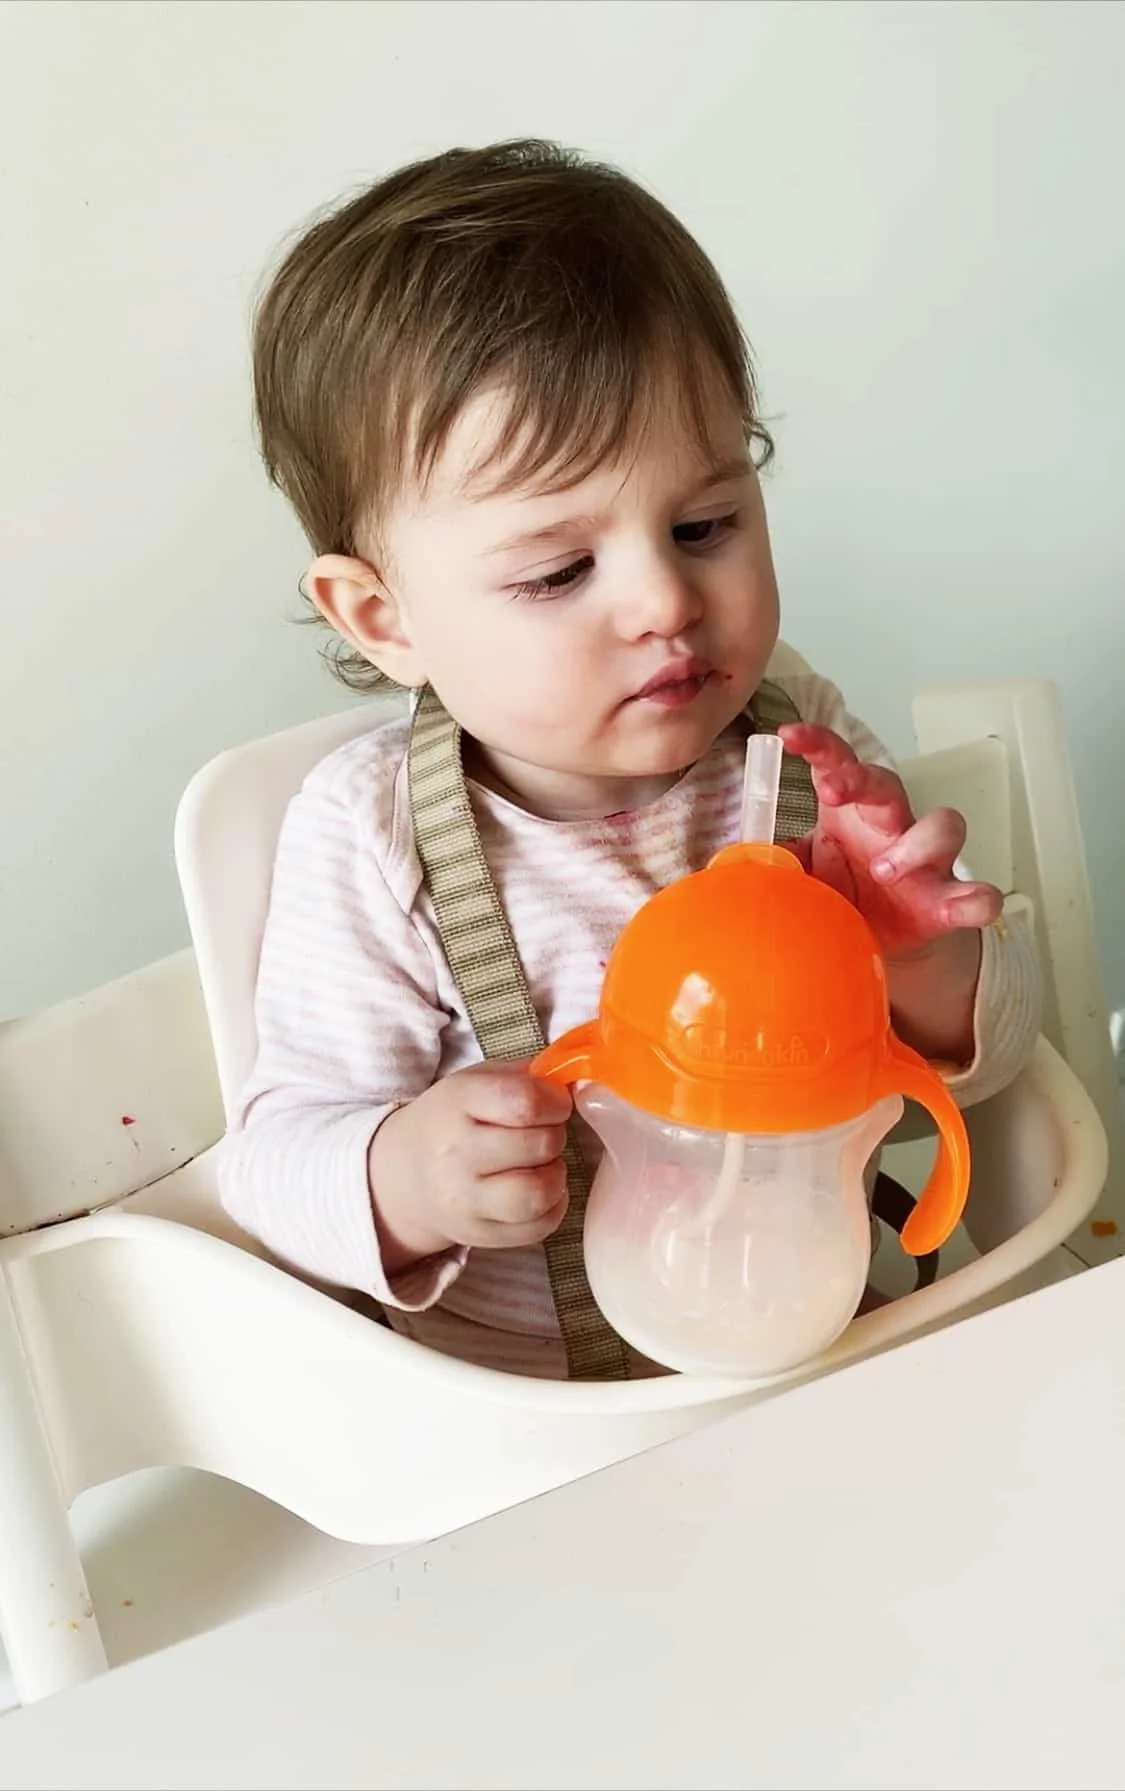 Choosing cups for babies and toddlers